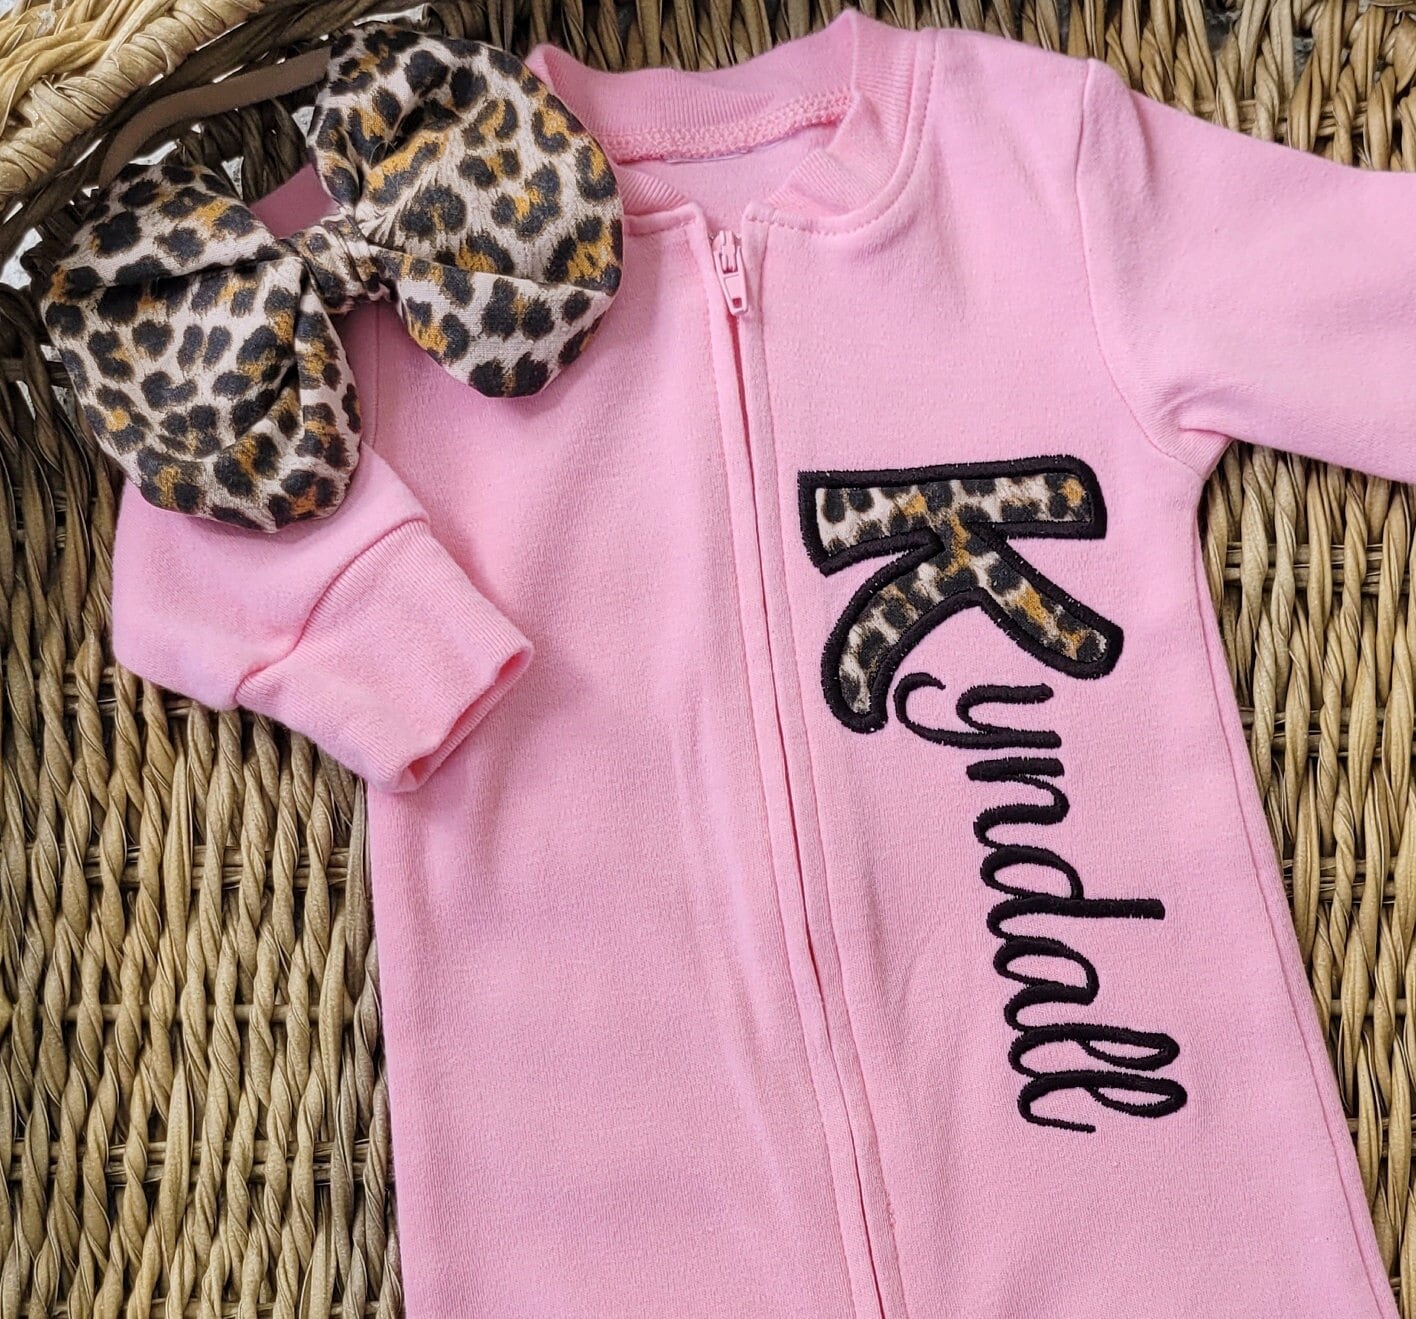 Leopard Print Girl Applique Coming Home Outfit